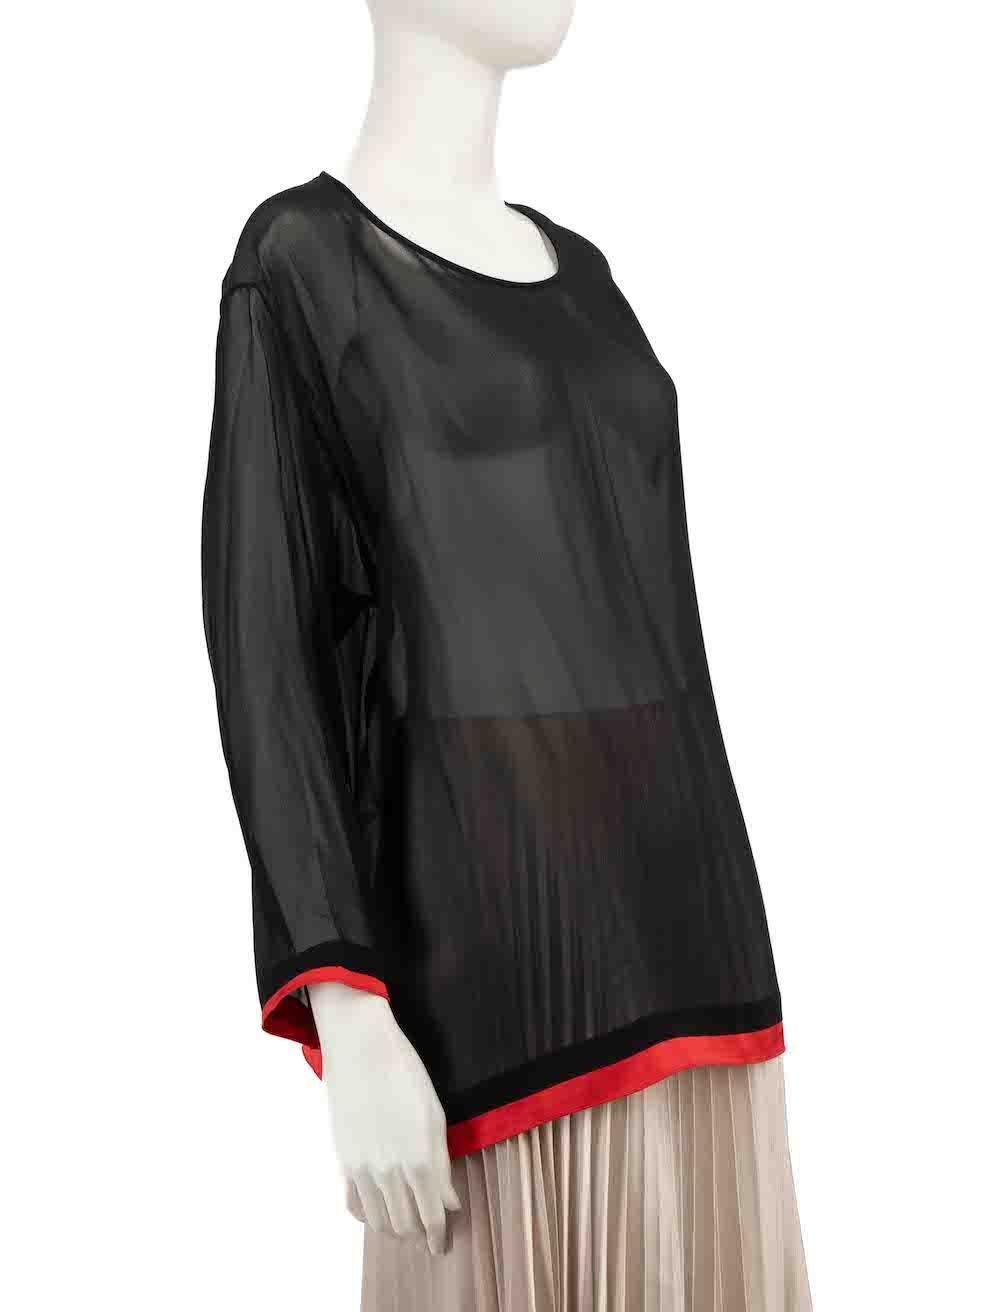 CONDITION is Very good. Hardly any visible wear to top is evident on this used Marni designer resale item.
 
 
 
 Details
 
 
 Black
 
 Silk
 
 Long sleeves top
 
 Round neckline
 
 Sheer
 
 Red trimmings
 
 
 
 
 
 Made in Portugal
 
 
 
